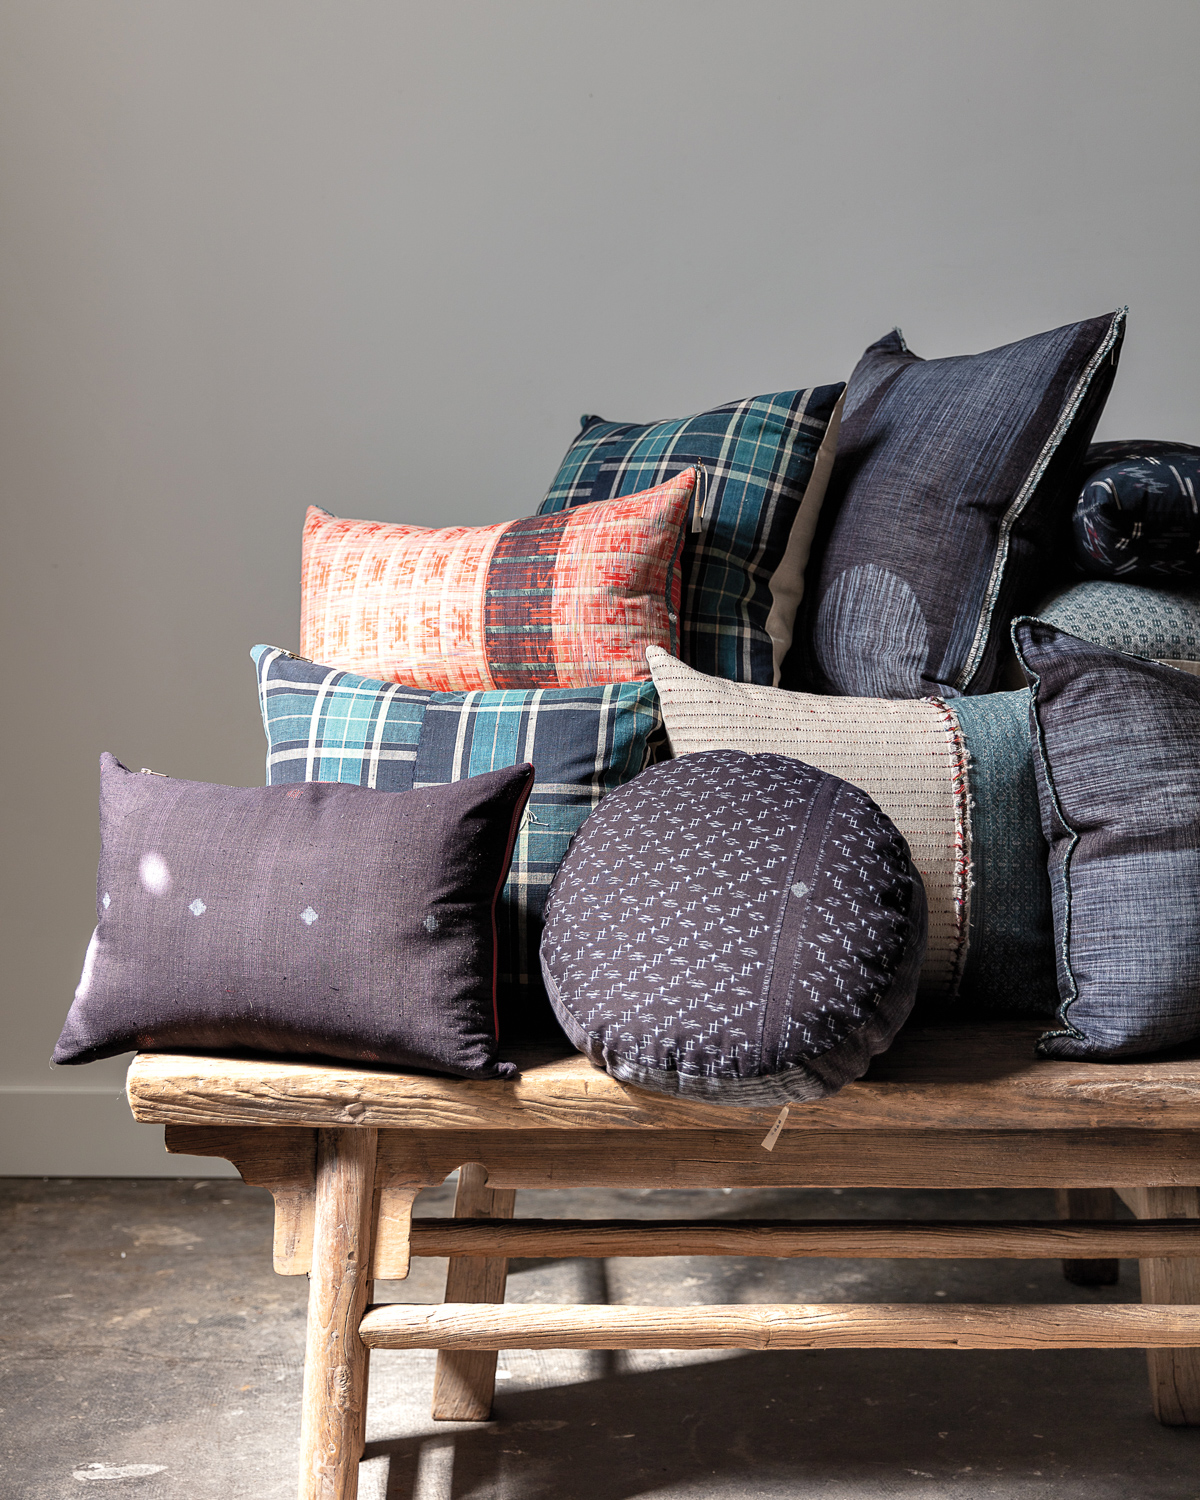 Dark blue, green and red patterned pillows atop a wooden bench.